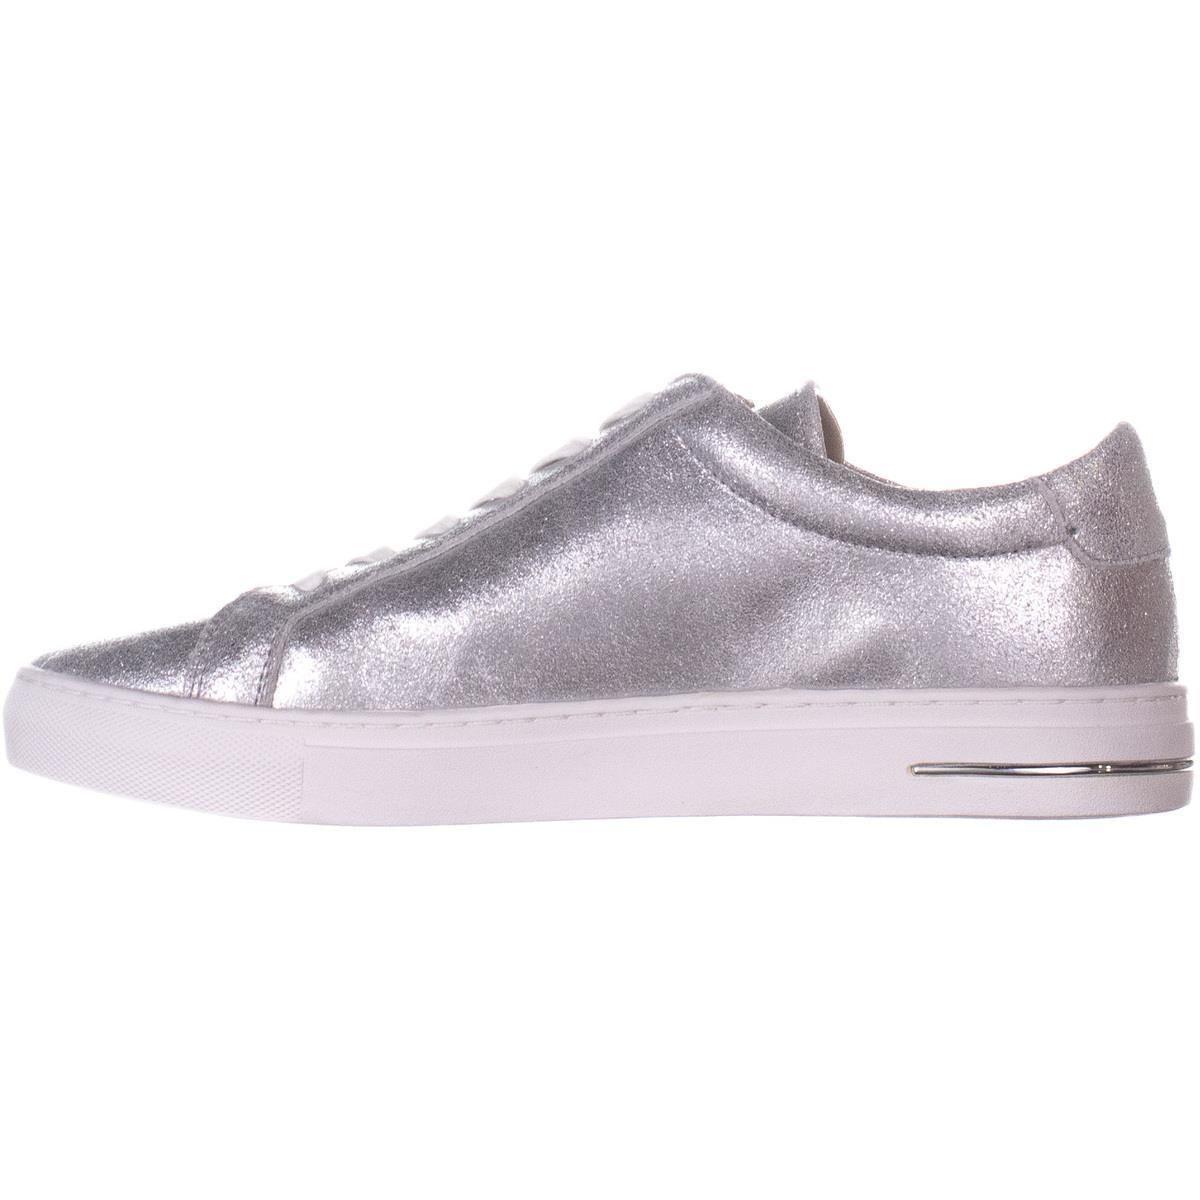 DKNY Leather Court Lace Up Sneakers in Silver (Metallic) - Lyst